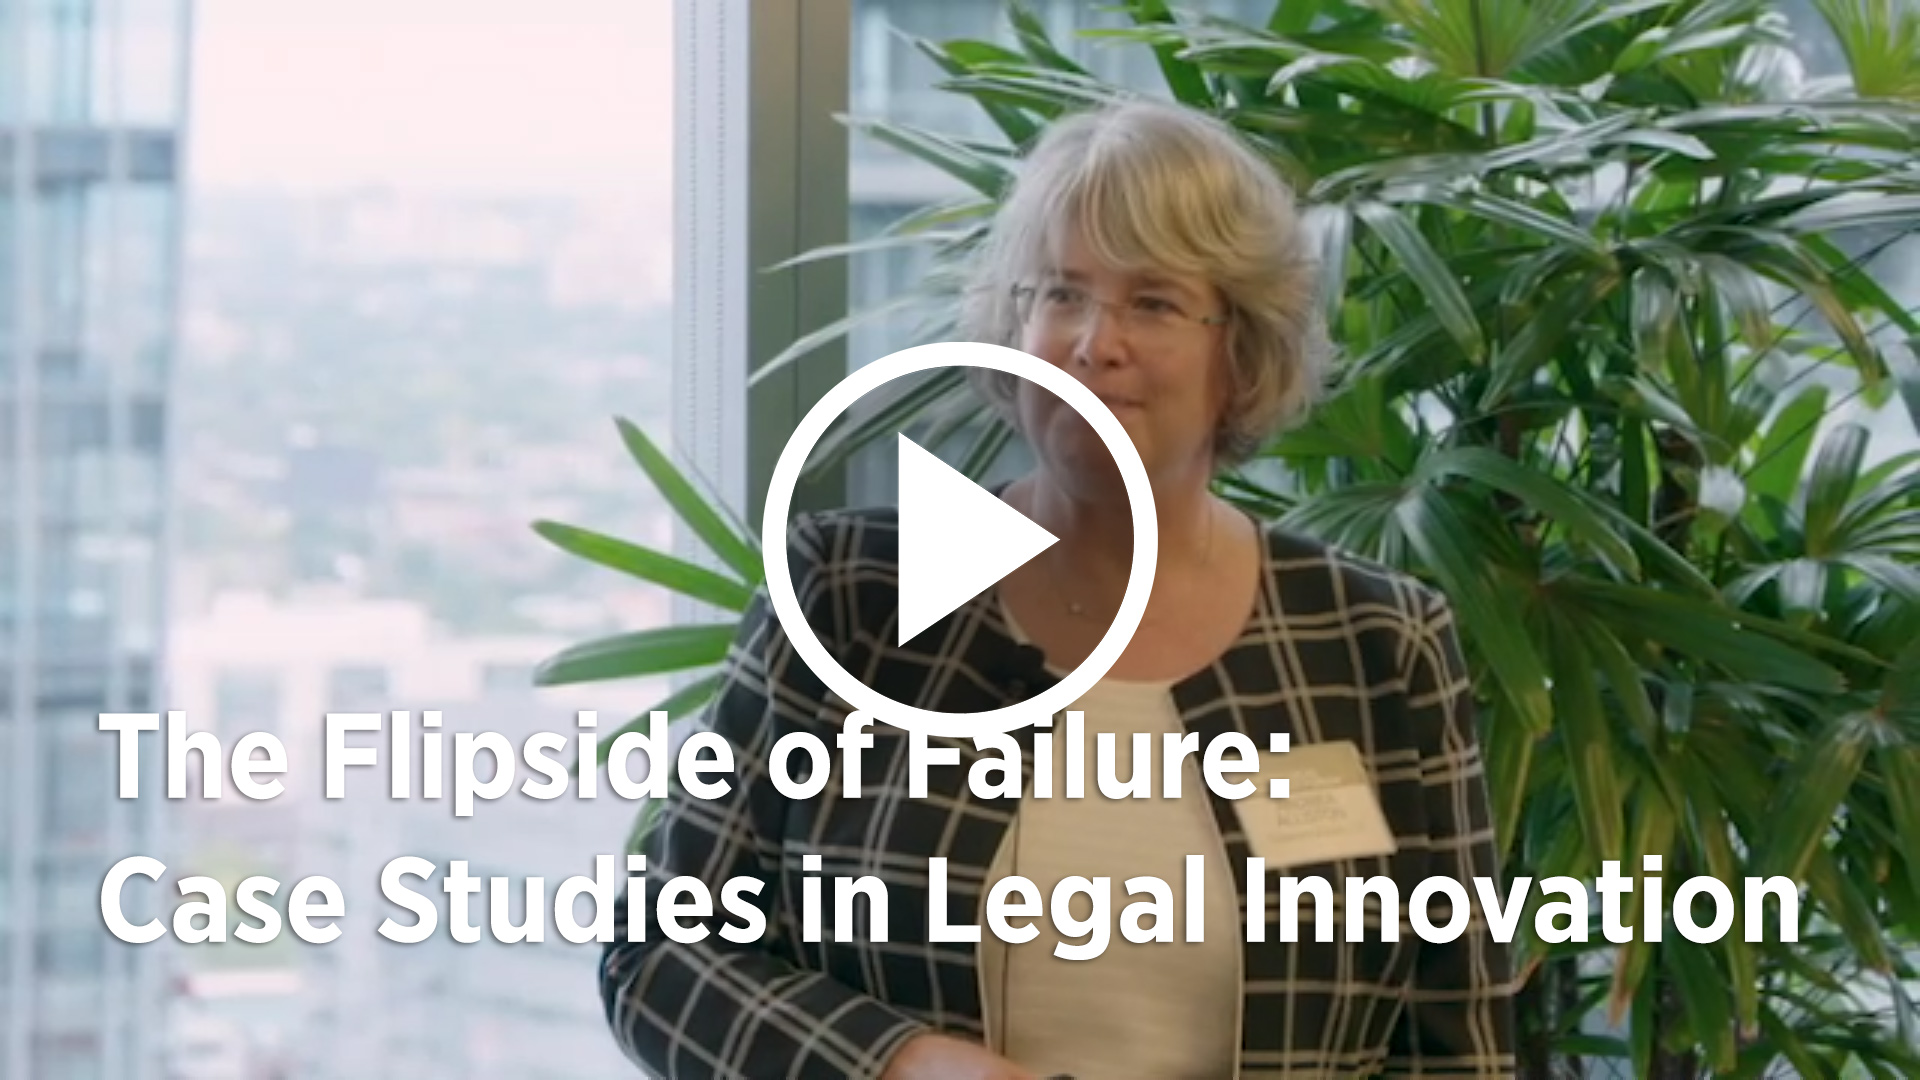 The Flipside of Failure: Case Studies in Legal Innovation